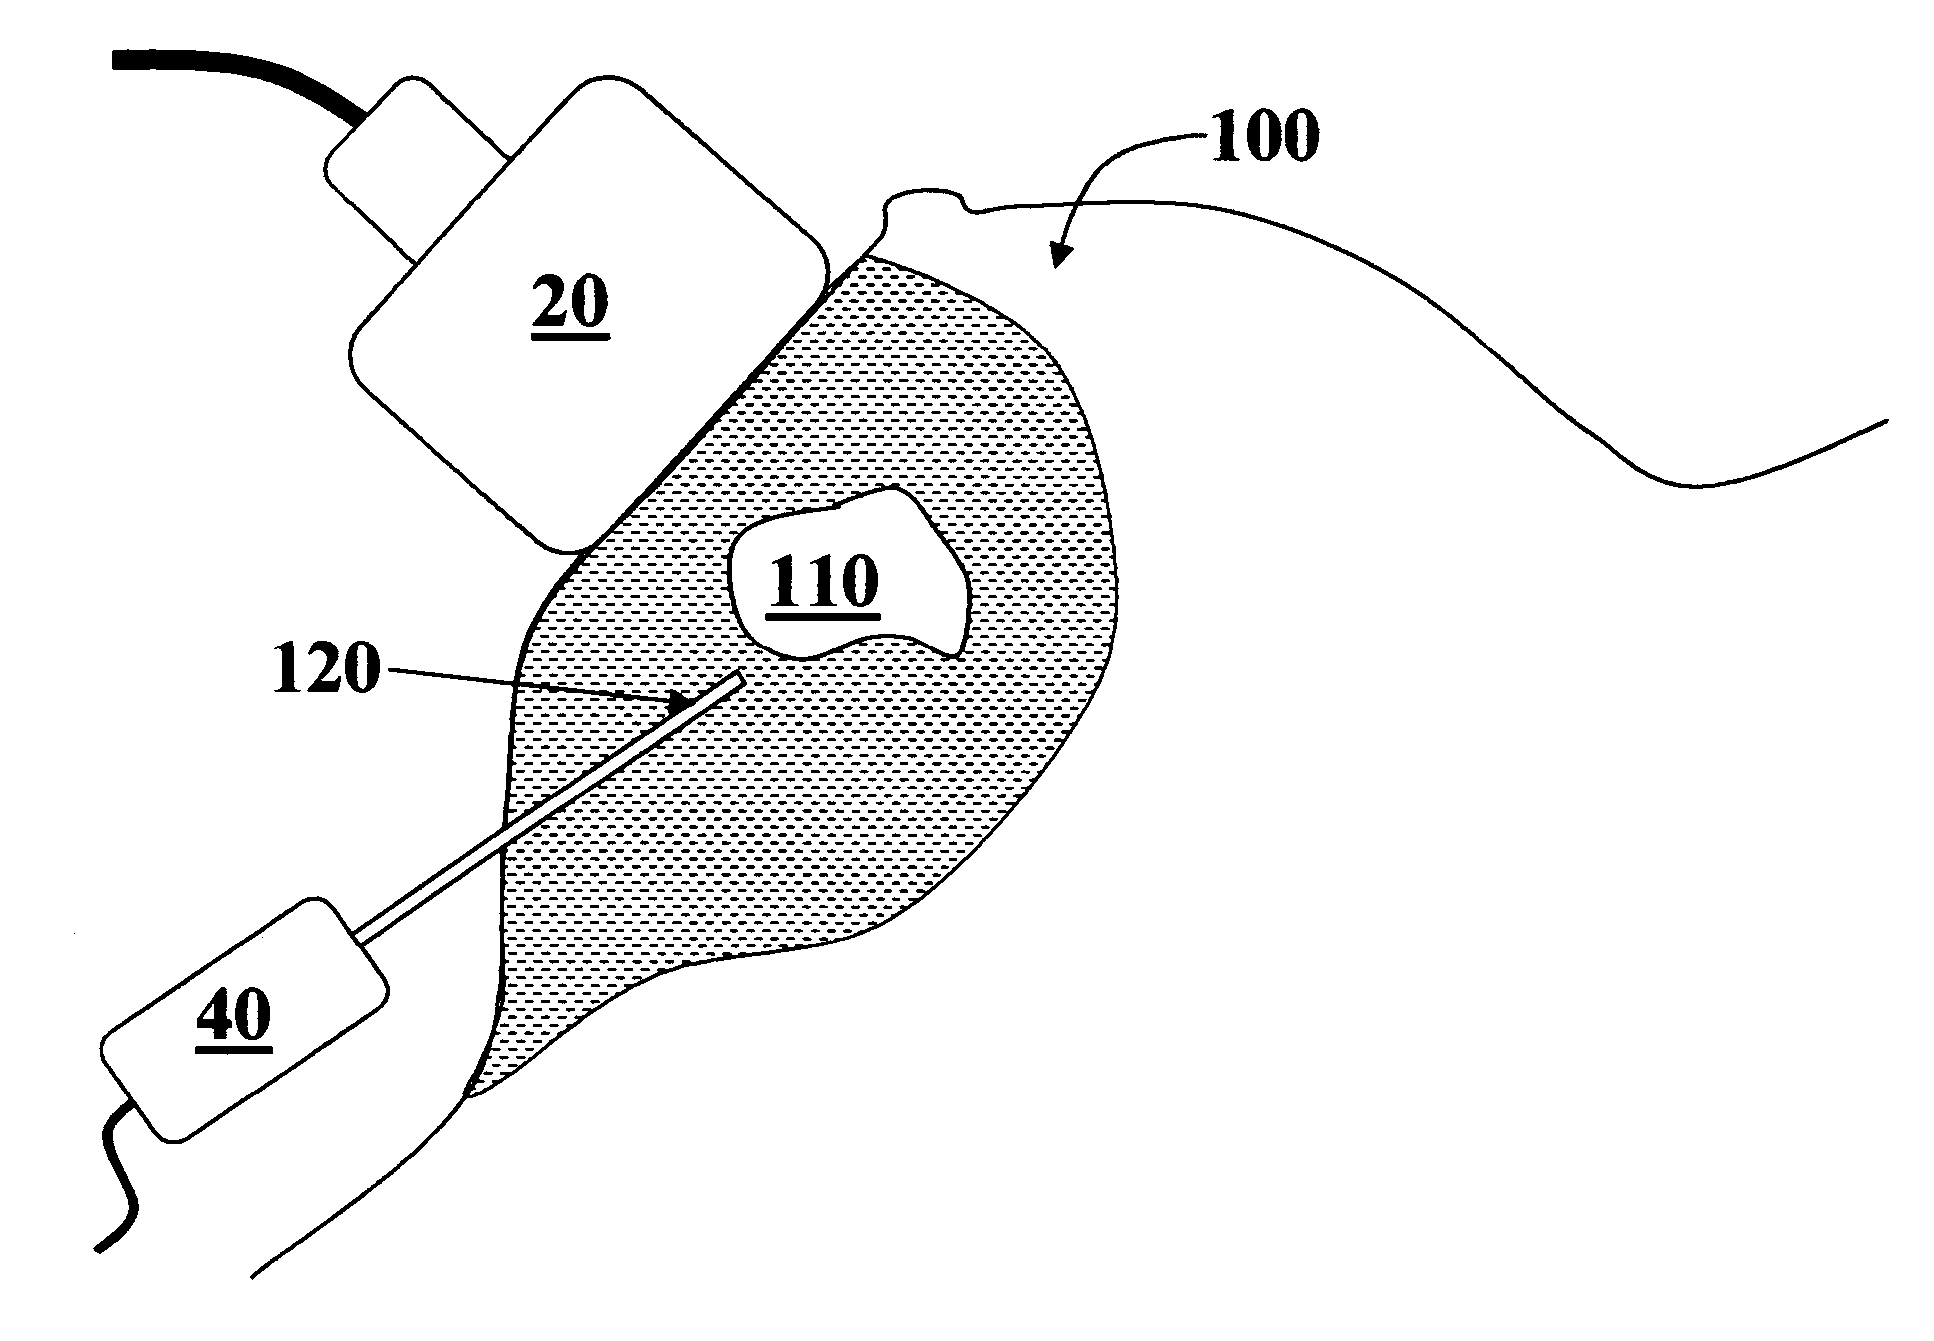 Ultrasound guided tissue measurement system